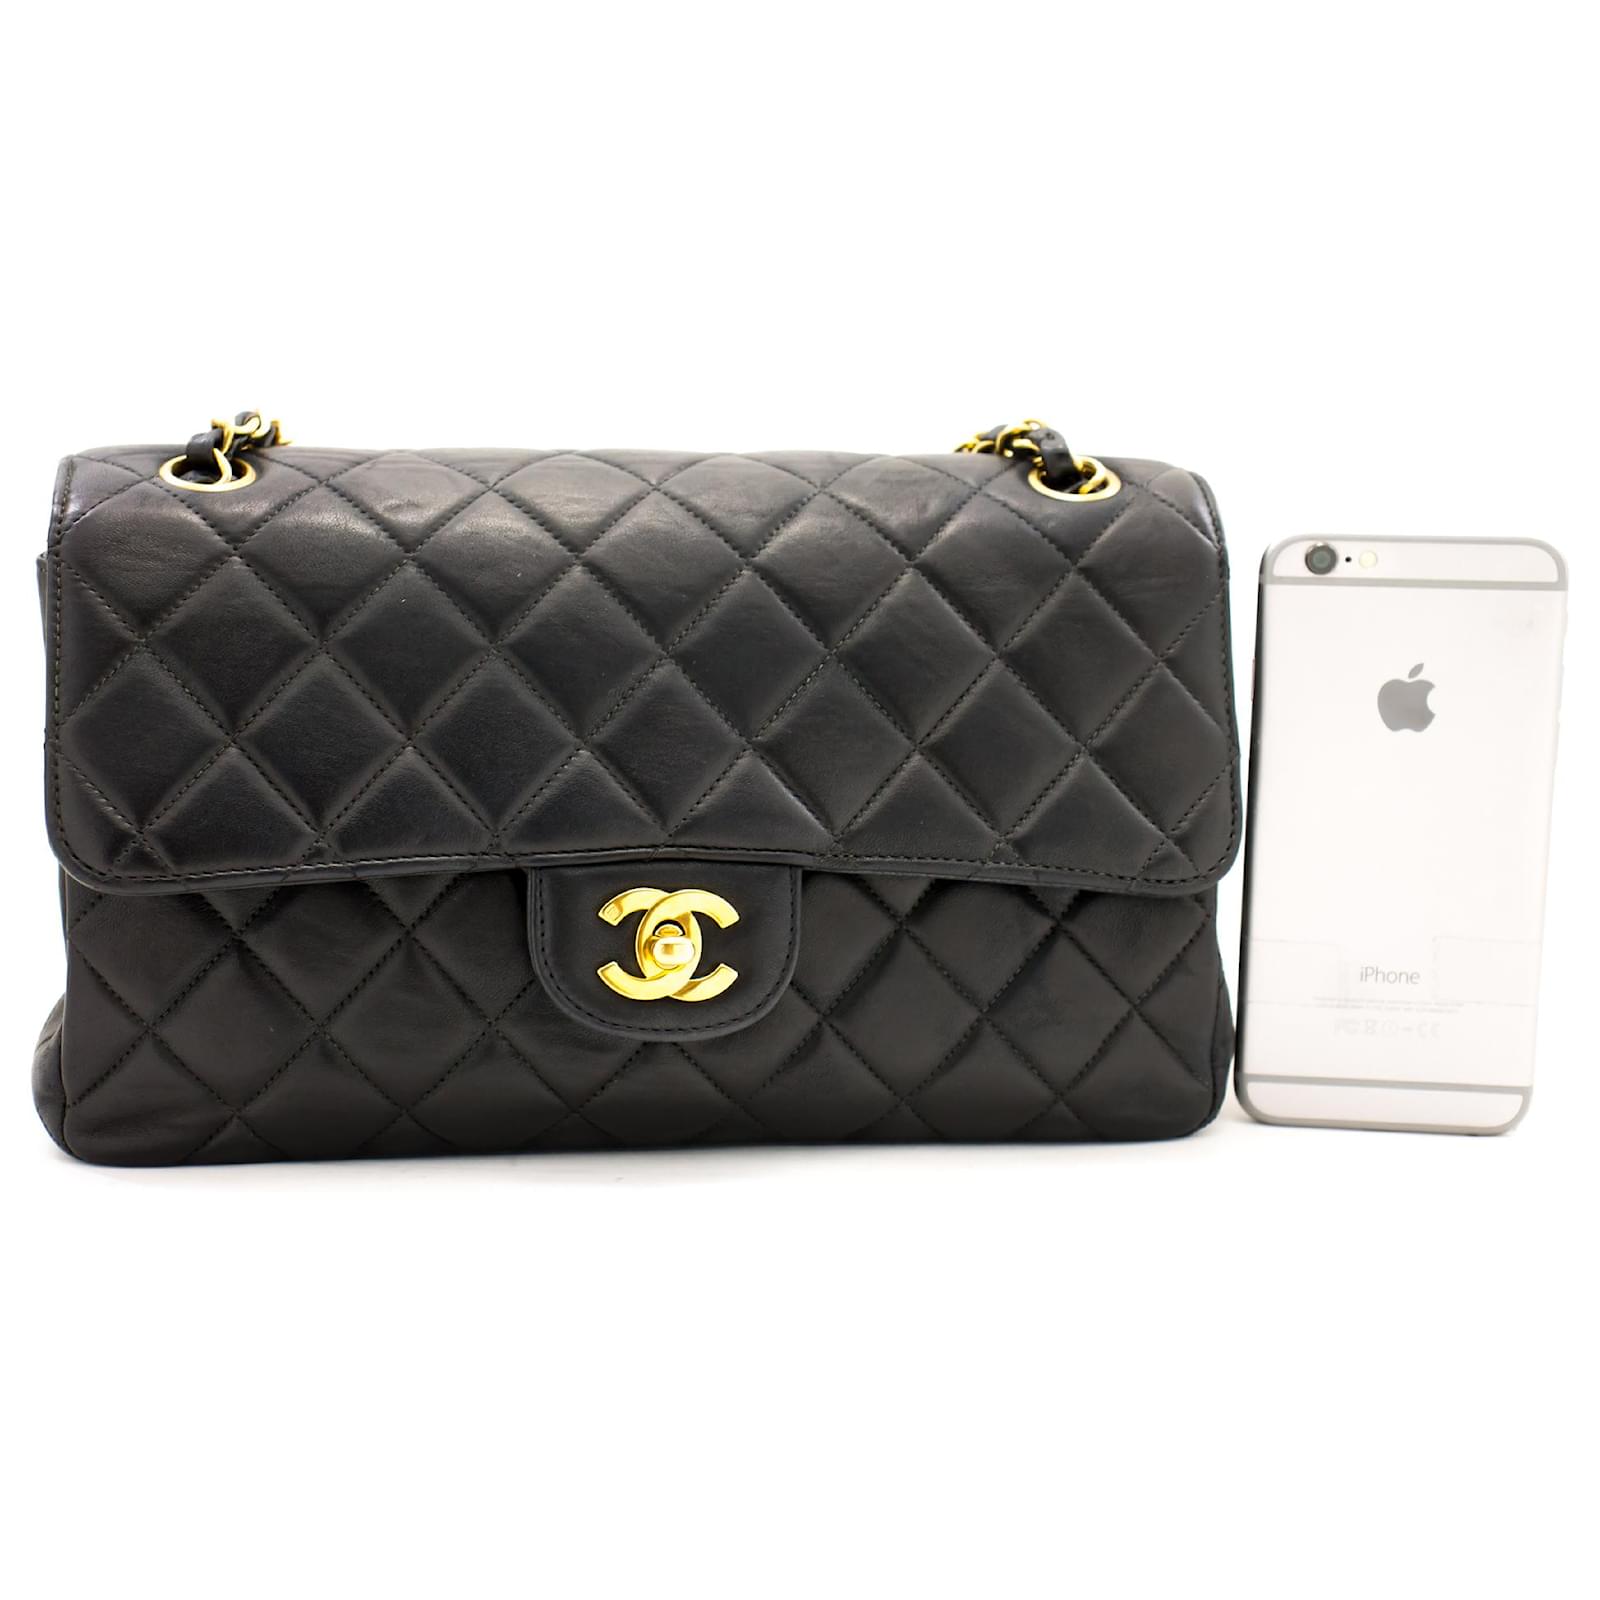 Authenticated Used Chanel Matelasse Chain Shoulder Smartphone Case 2Way Bag  Leather Black AP3367 